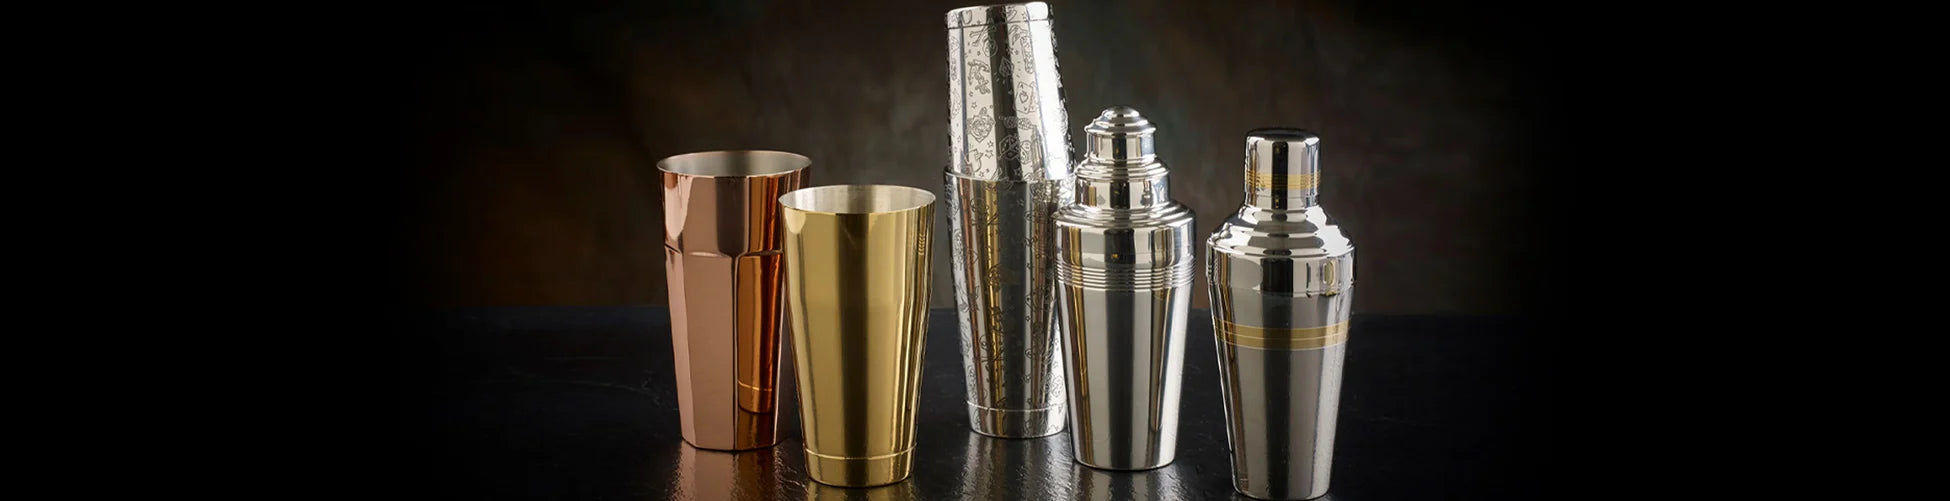 Caring for steel barware